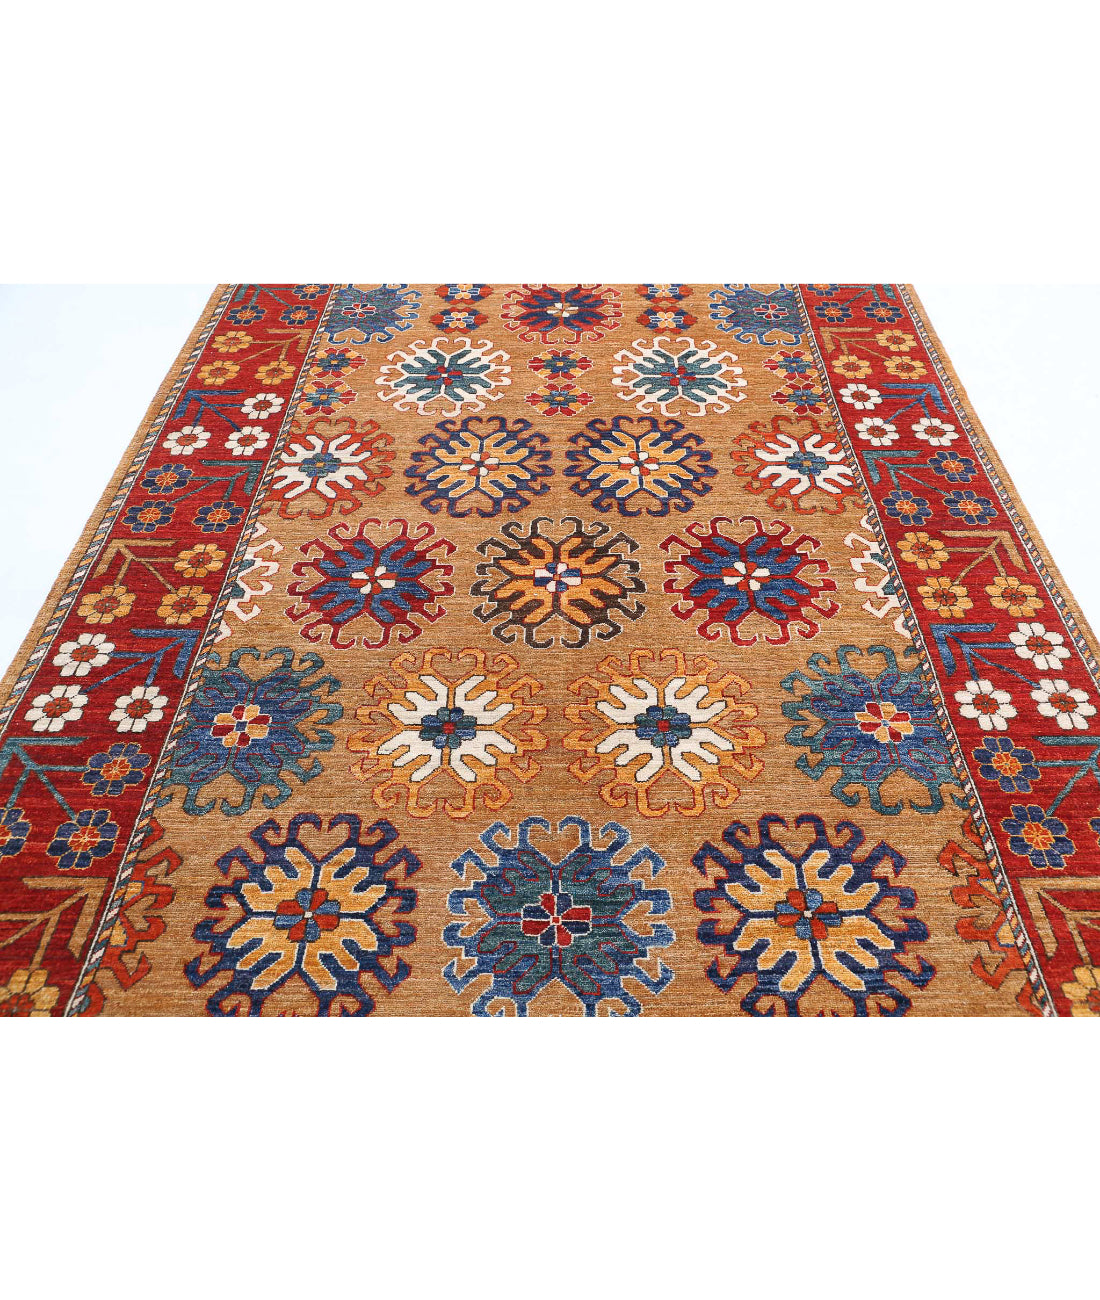 Hand Knotted Nomadic Caucasian Humna Wool Rug - 6'10'' x 9'5'' 6'10'' x 9'5'' (205 X 283) / Gold / Red